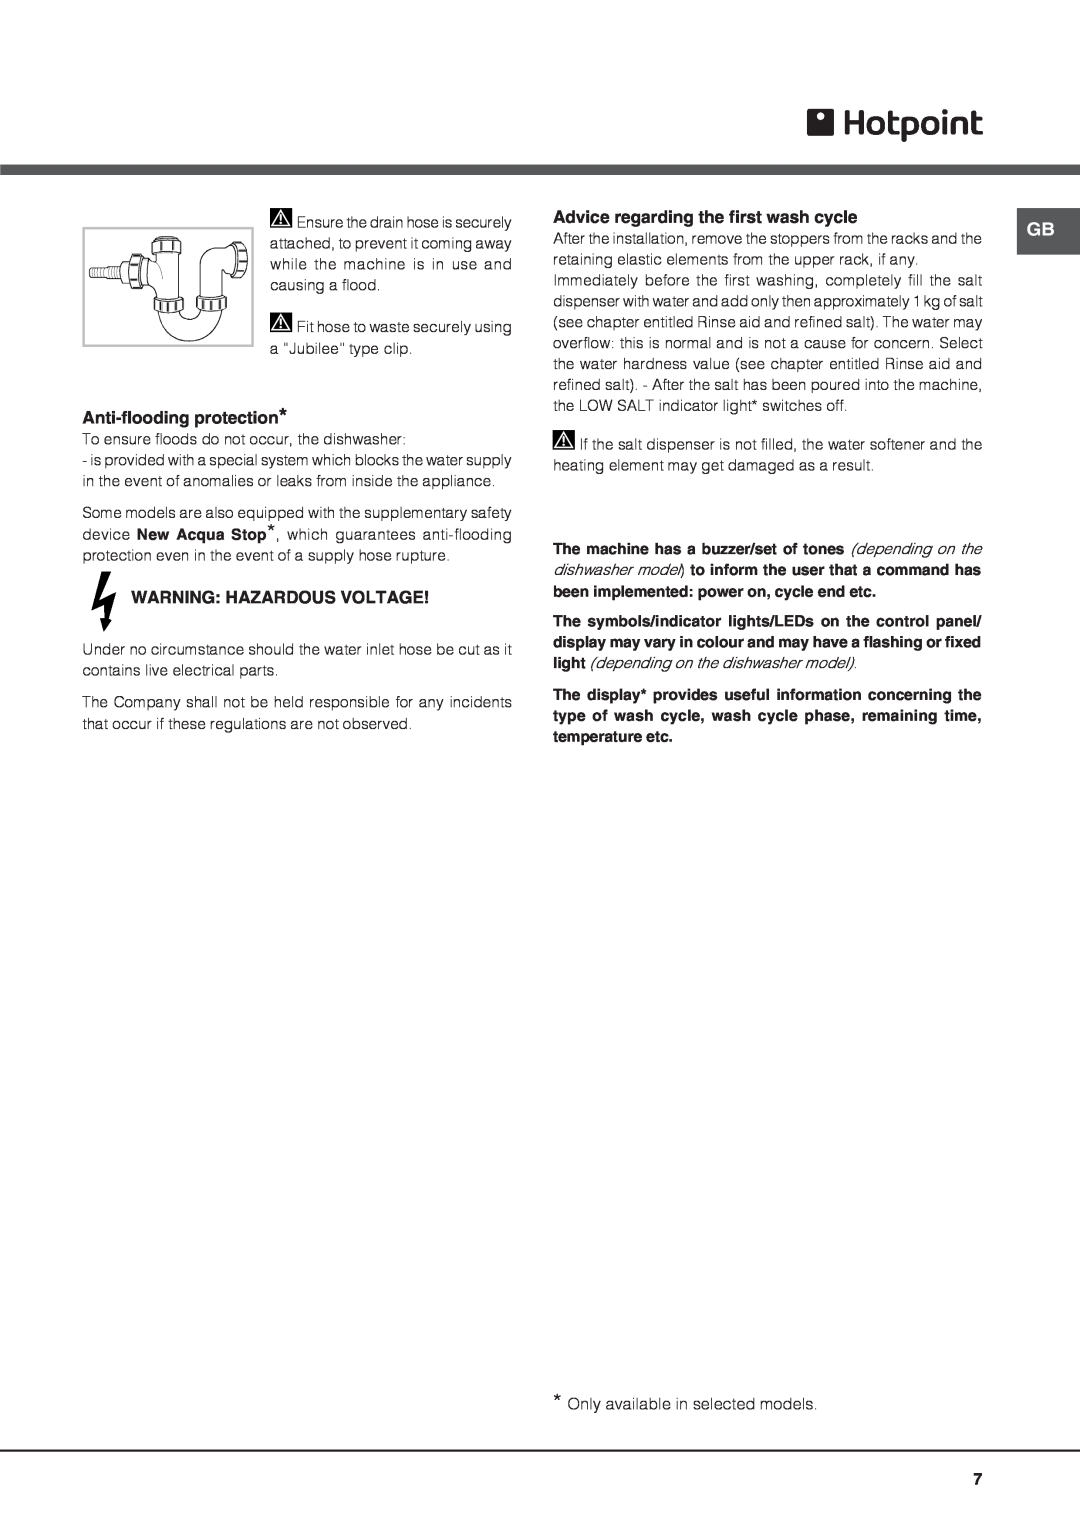 Hotpoint FDFET 33121 manual Anti-flooding protection, Warning Hazardous Voltage, Advice regarding the first wash cycle 